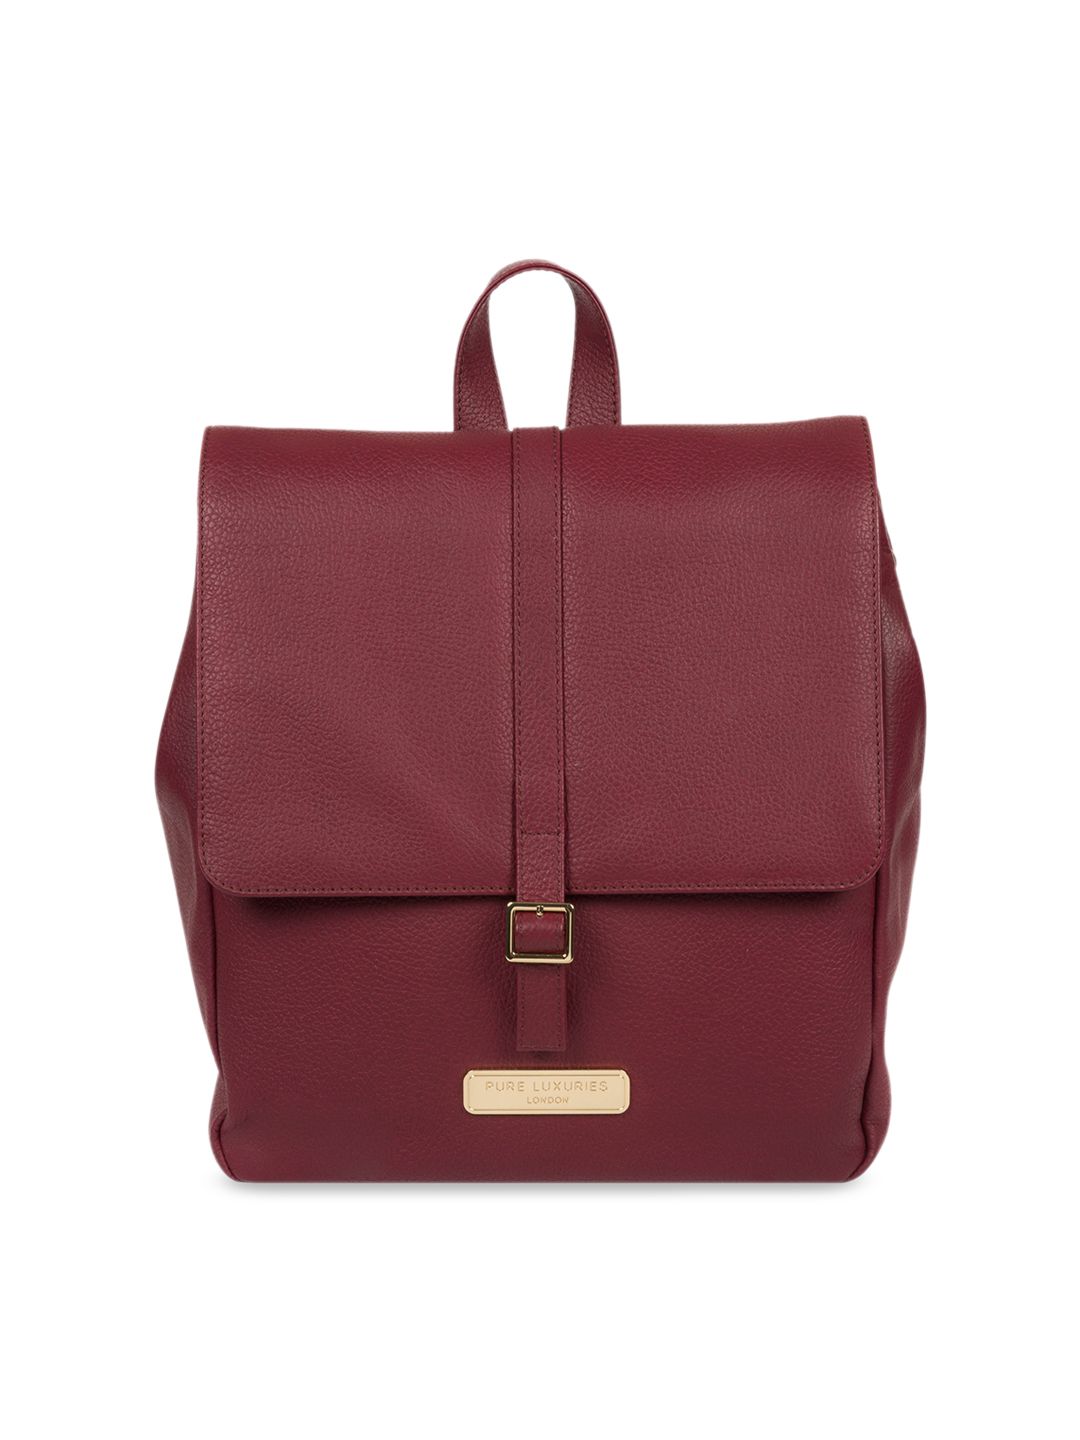 PURE LUXURIES LONDON Women Maroon Solid Genuine Leather Daisy Backpack Price in India